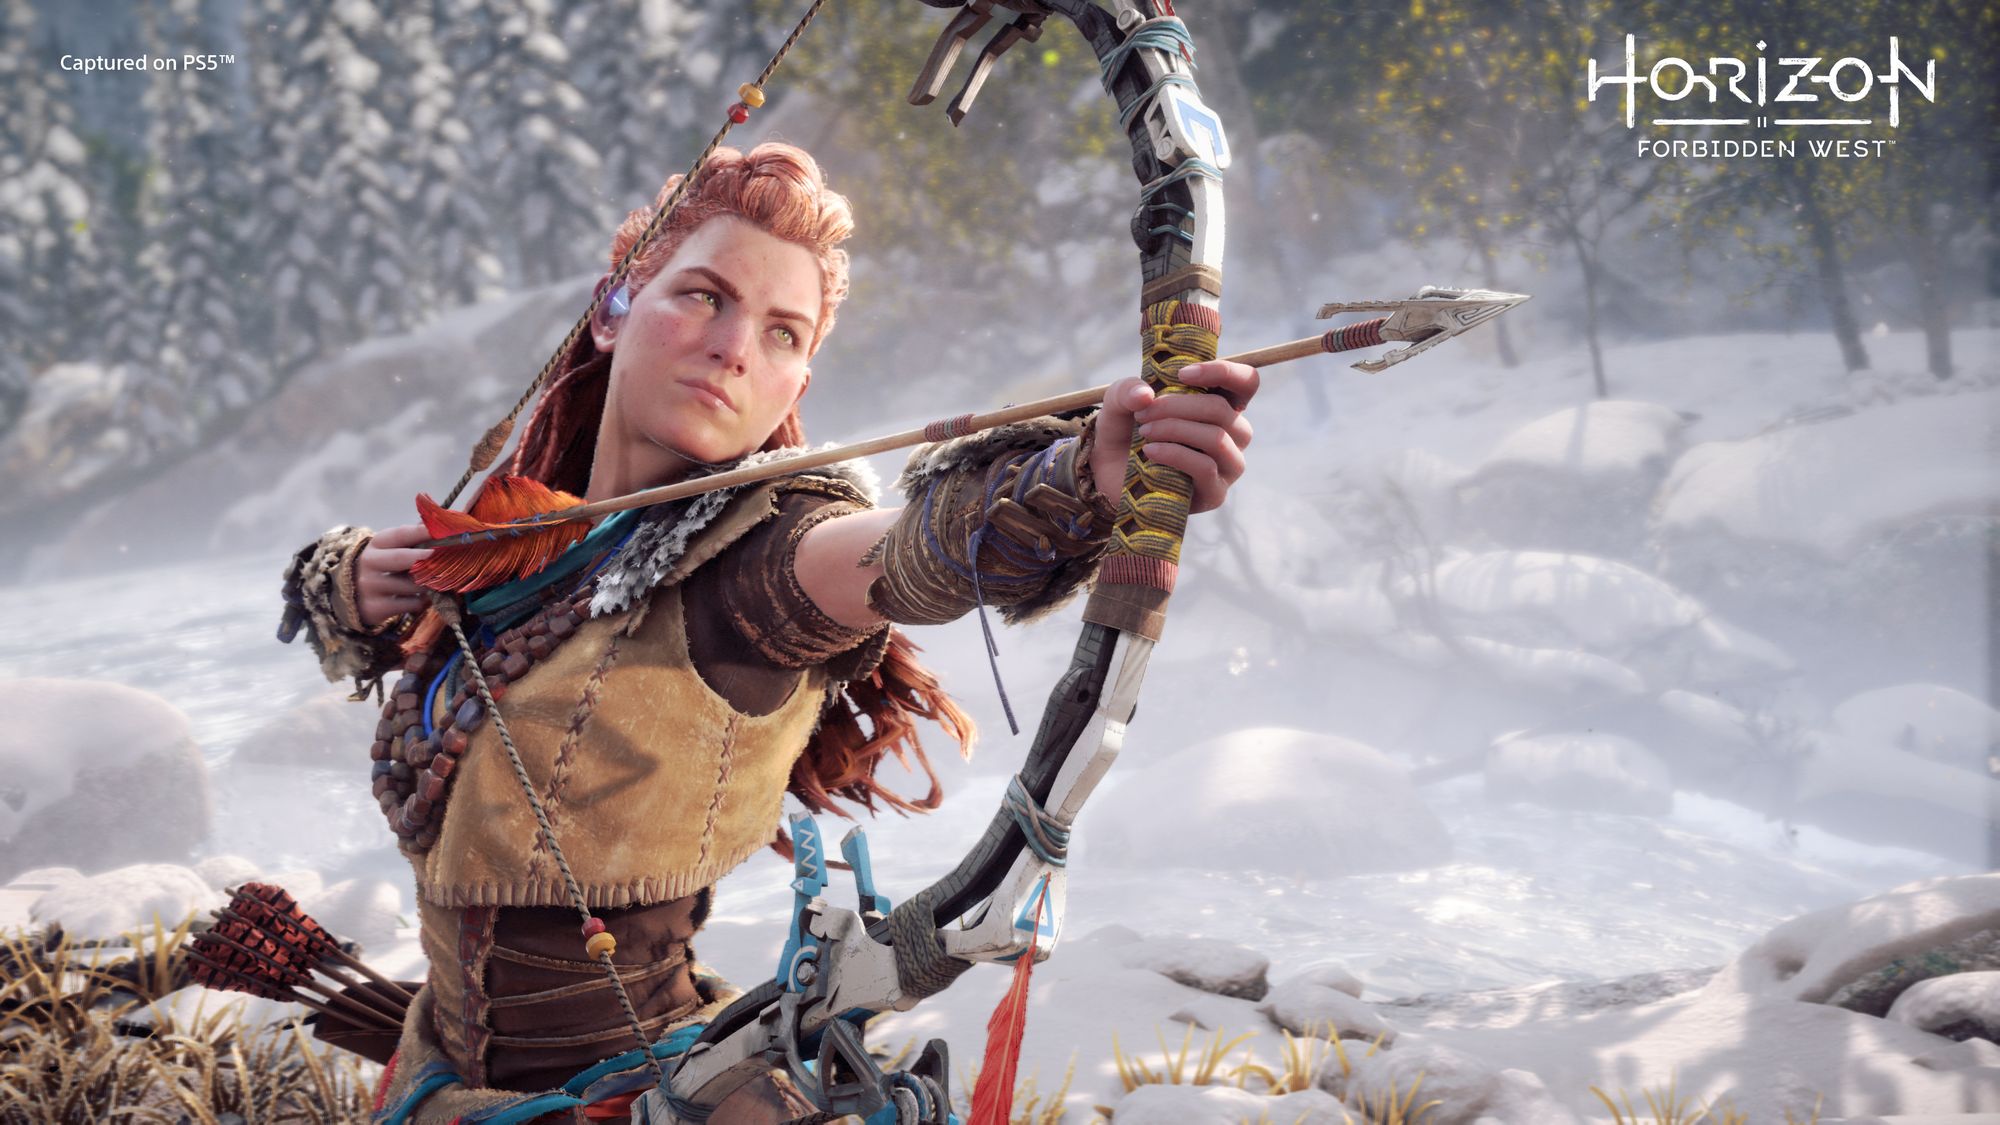 A press image form Horizon Forbidden West, source: presskit - a young white woman with red hair and basic clothing holds a bow and arrow pointed just off screen, against a snowy backdrop